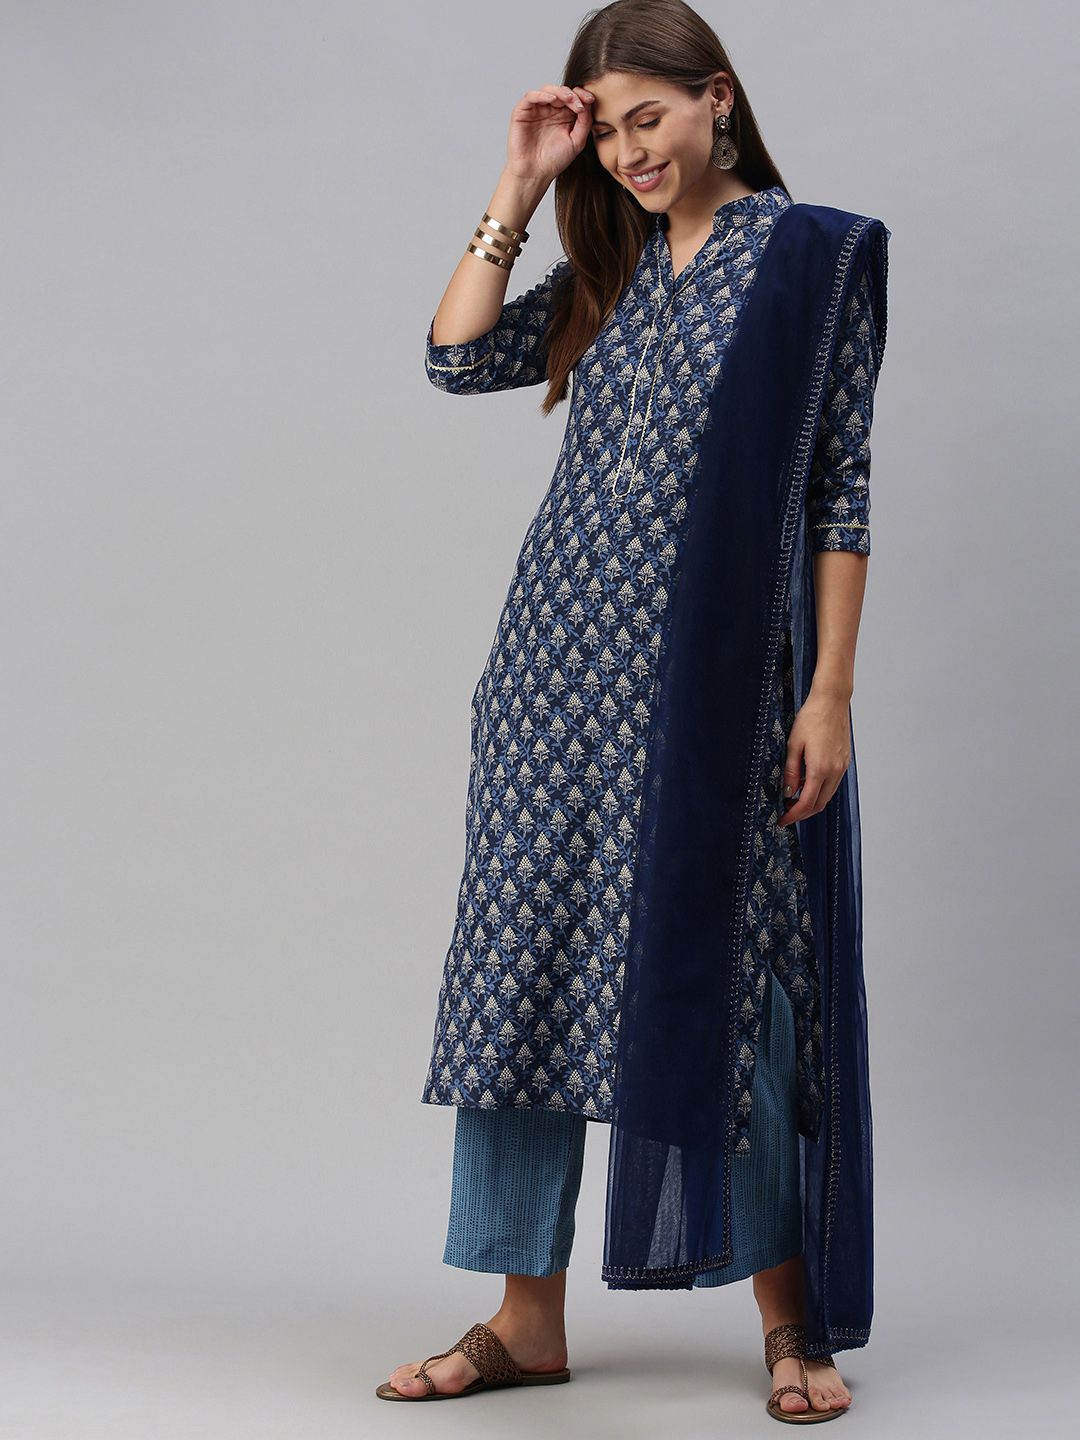 SheWill Blue Printed Unstitched Dress Material Price in India